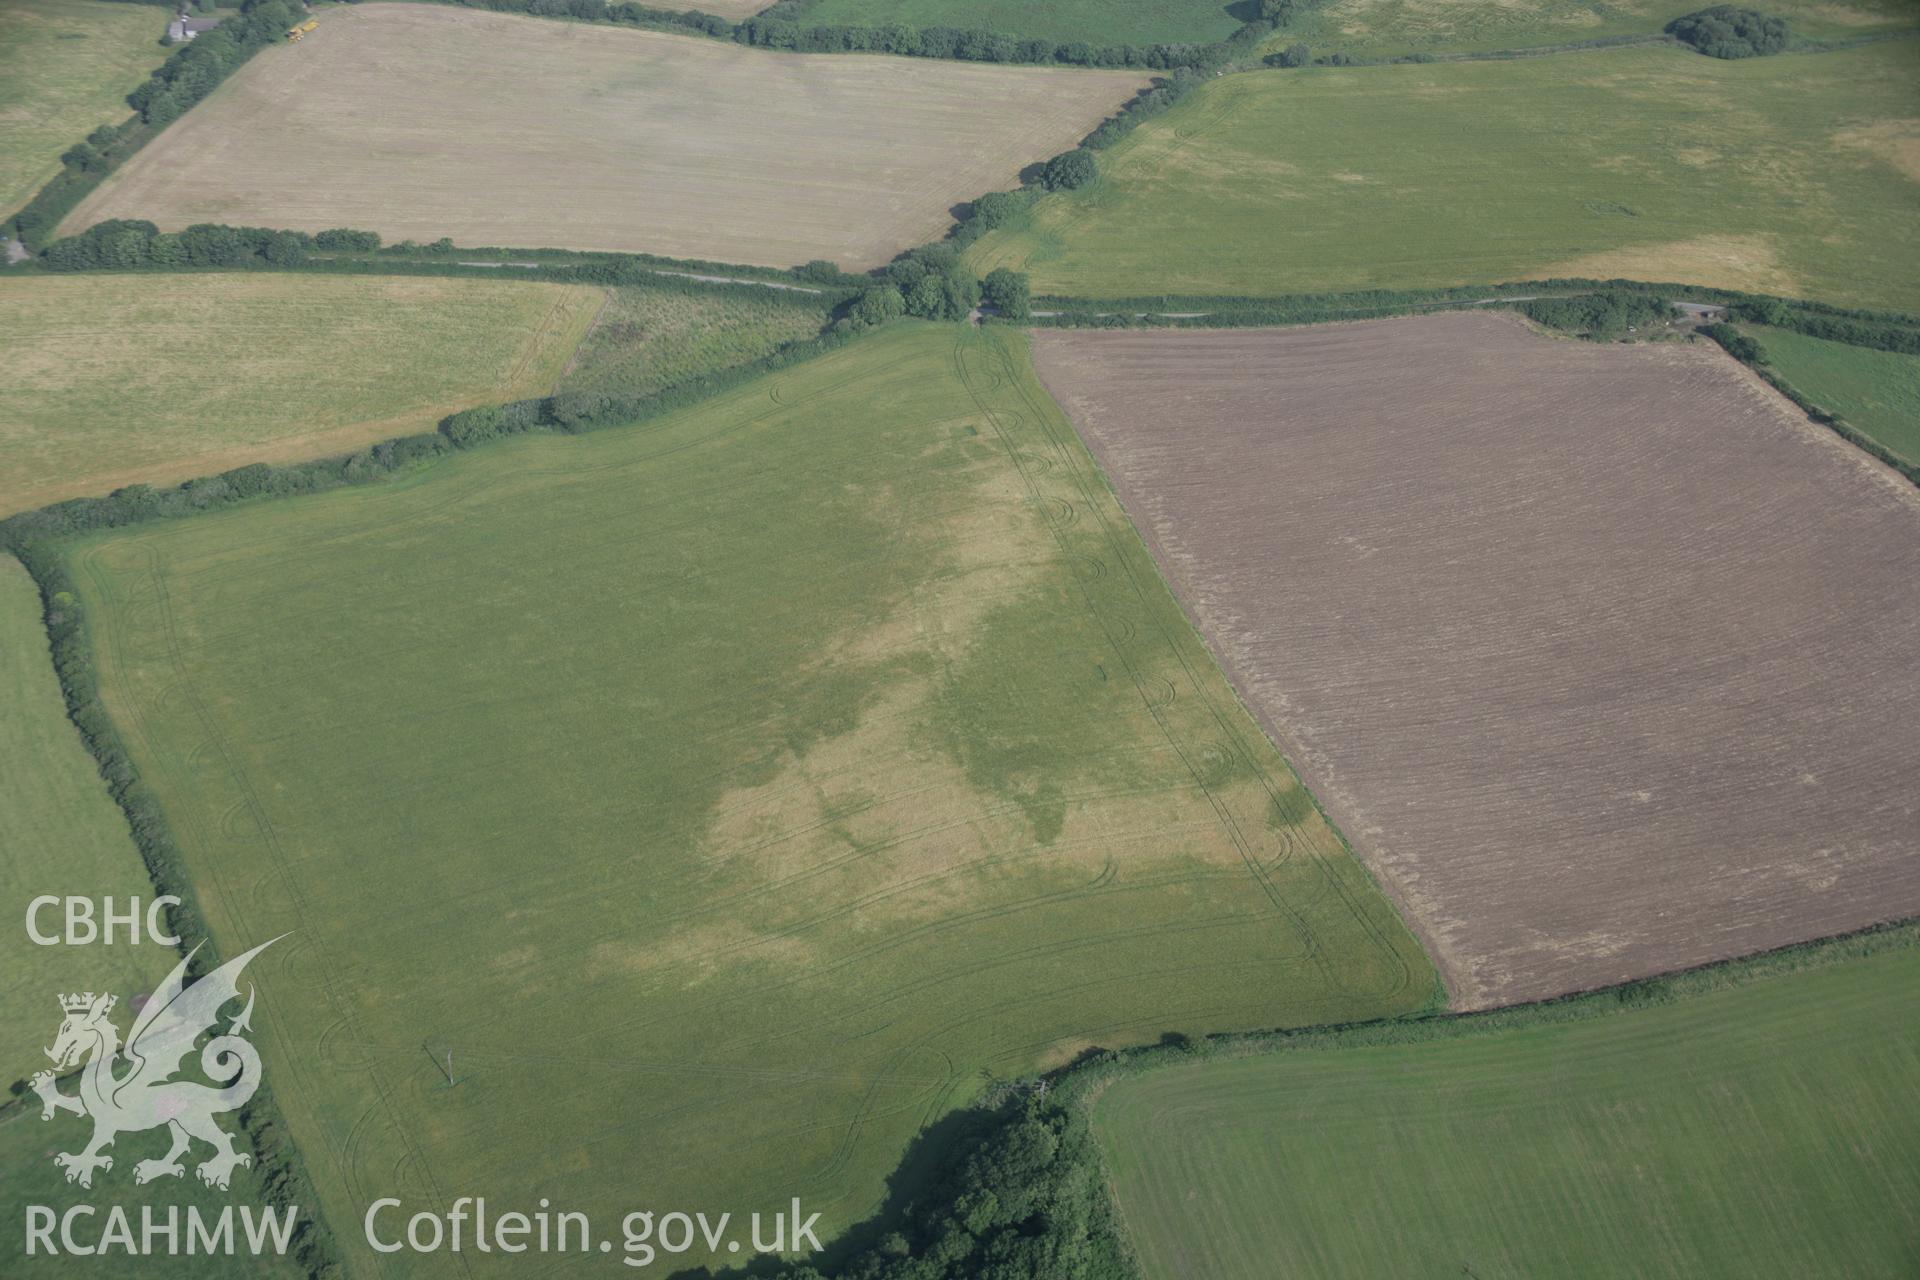 RCAHMW digital colour oblique photograph of a cropmark enclosure at Dryslwyn, with pitting, viewed from the south-east. Taken on 27/07/2005 by T.G. Driver.